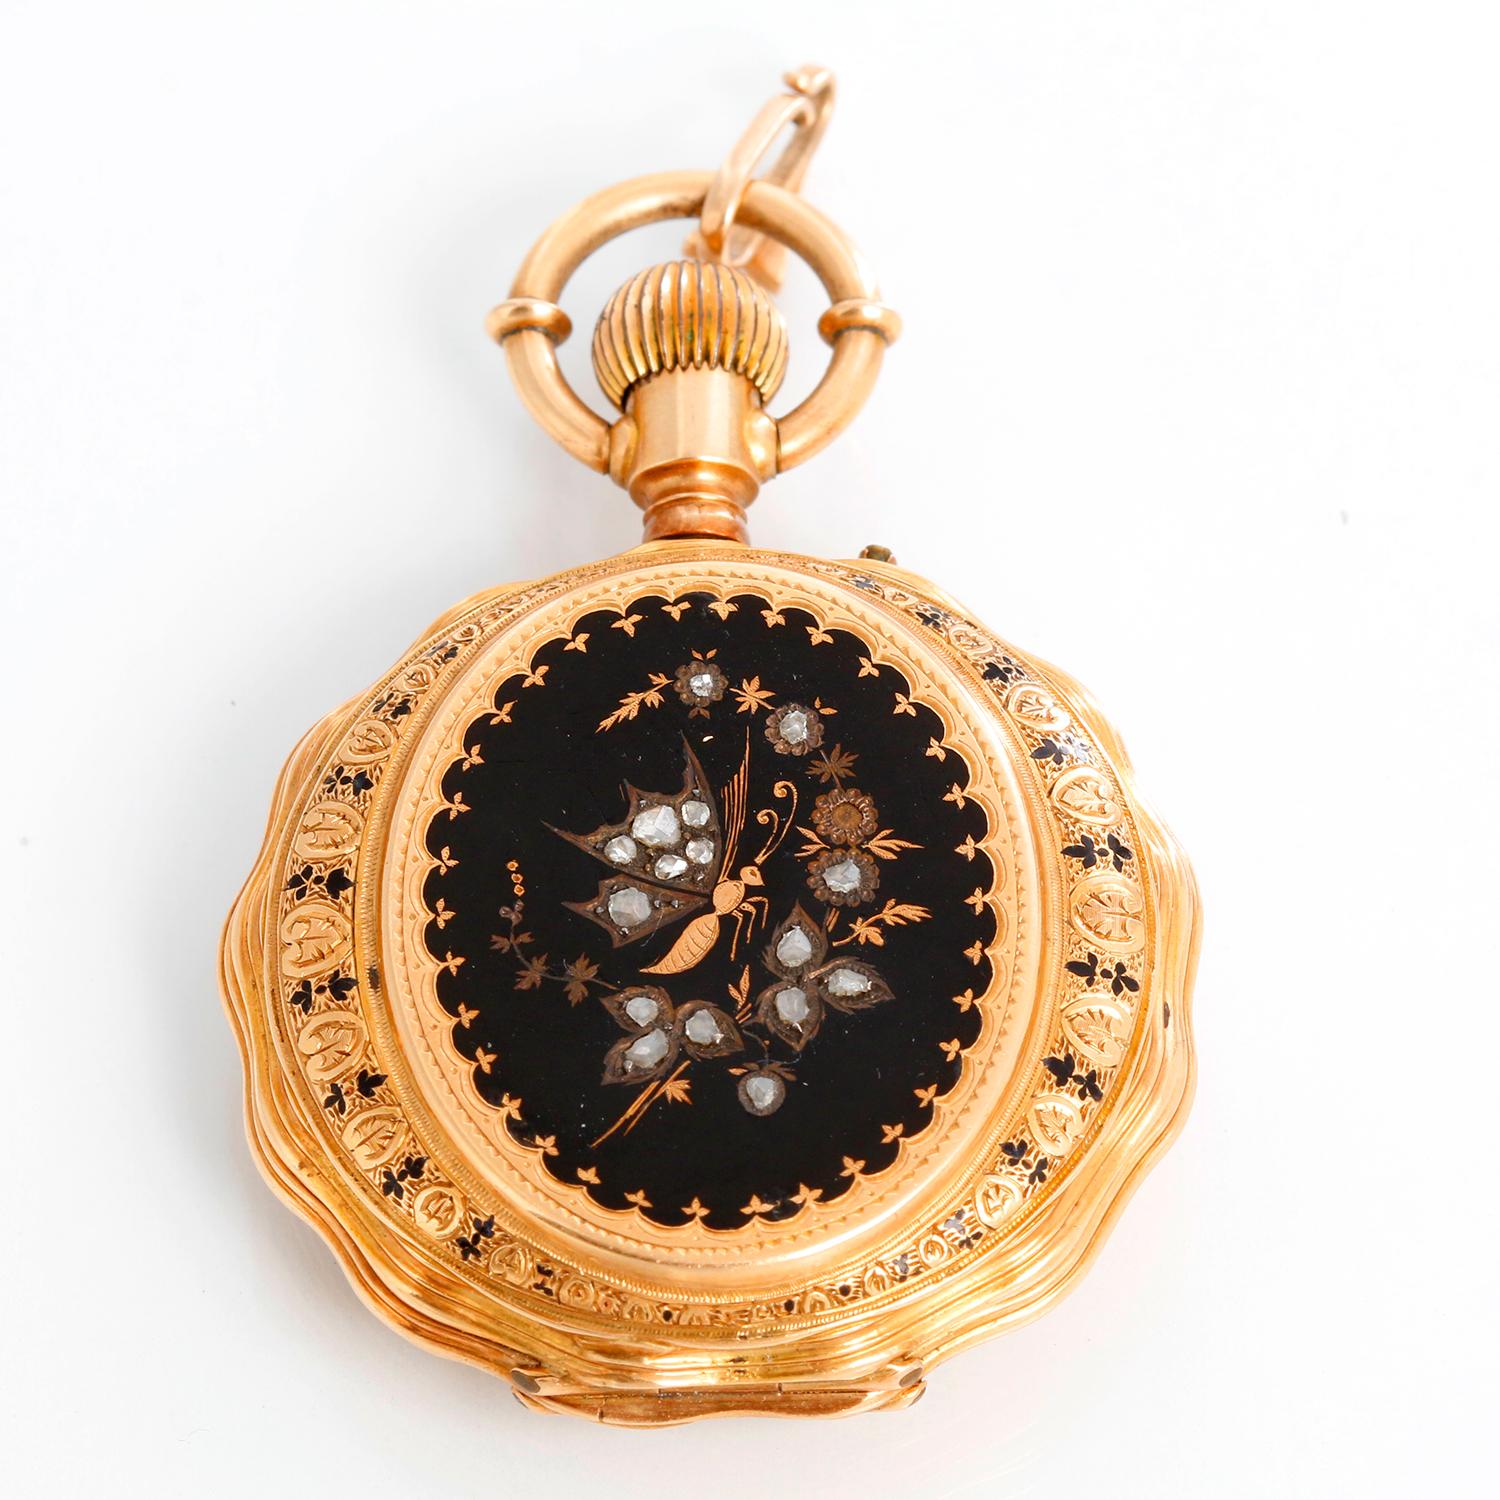 Girard- Perreguax 18K Gold & Enamel Ladies Pendant Pocket Watch - Manual winding. 18K Yellow gold with ornate case; black enamel on case back (36 mm ) . Elegantly decorated white dial with Roman numerals. Pre-owned with custom box.
Will be serviced